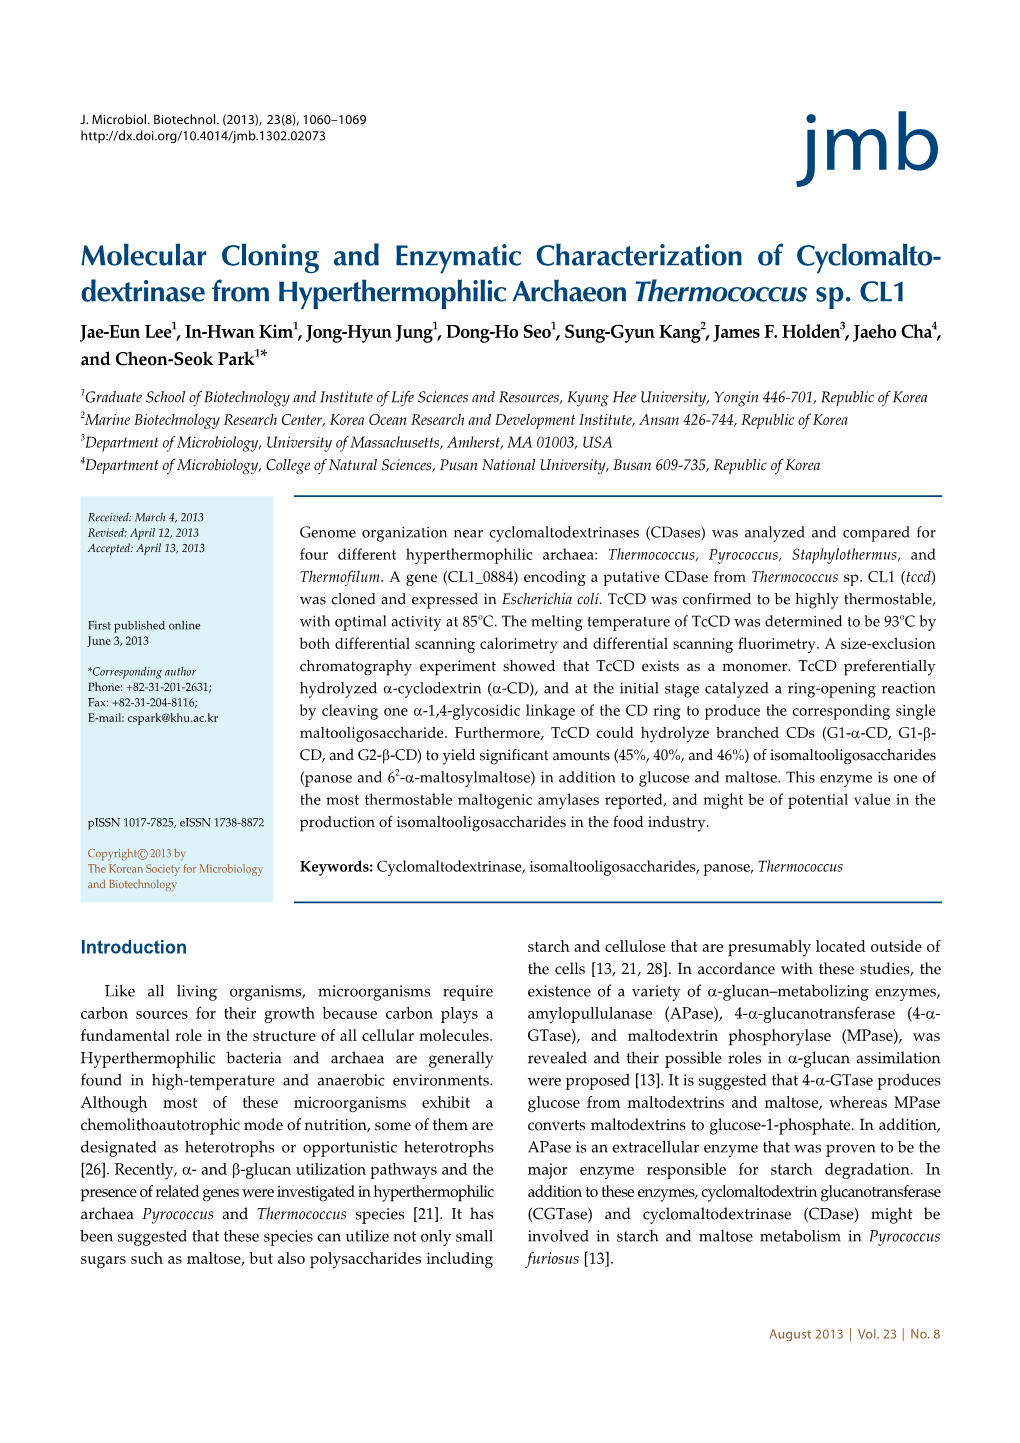 Molecular Cloning and Enzymatic Characterization of Cyclomalto- Dextrinase from Hyperthermophilic Archaeon Thermococcus Sp